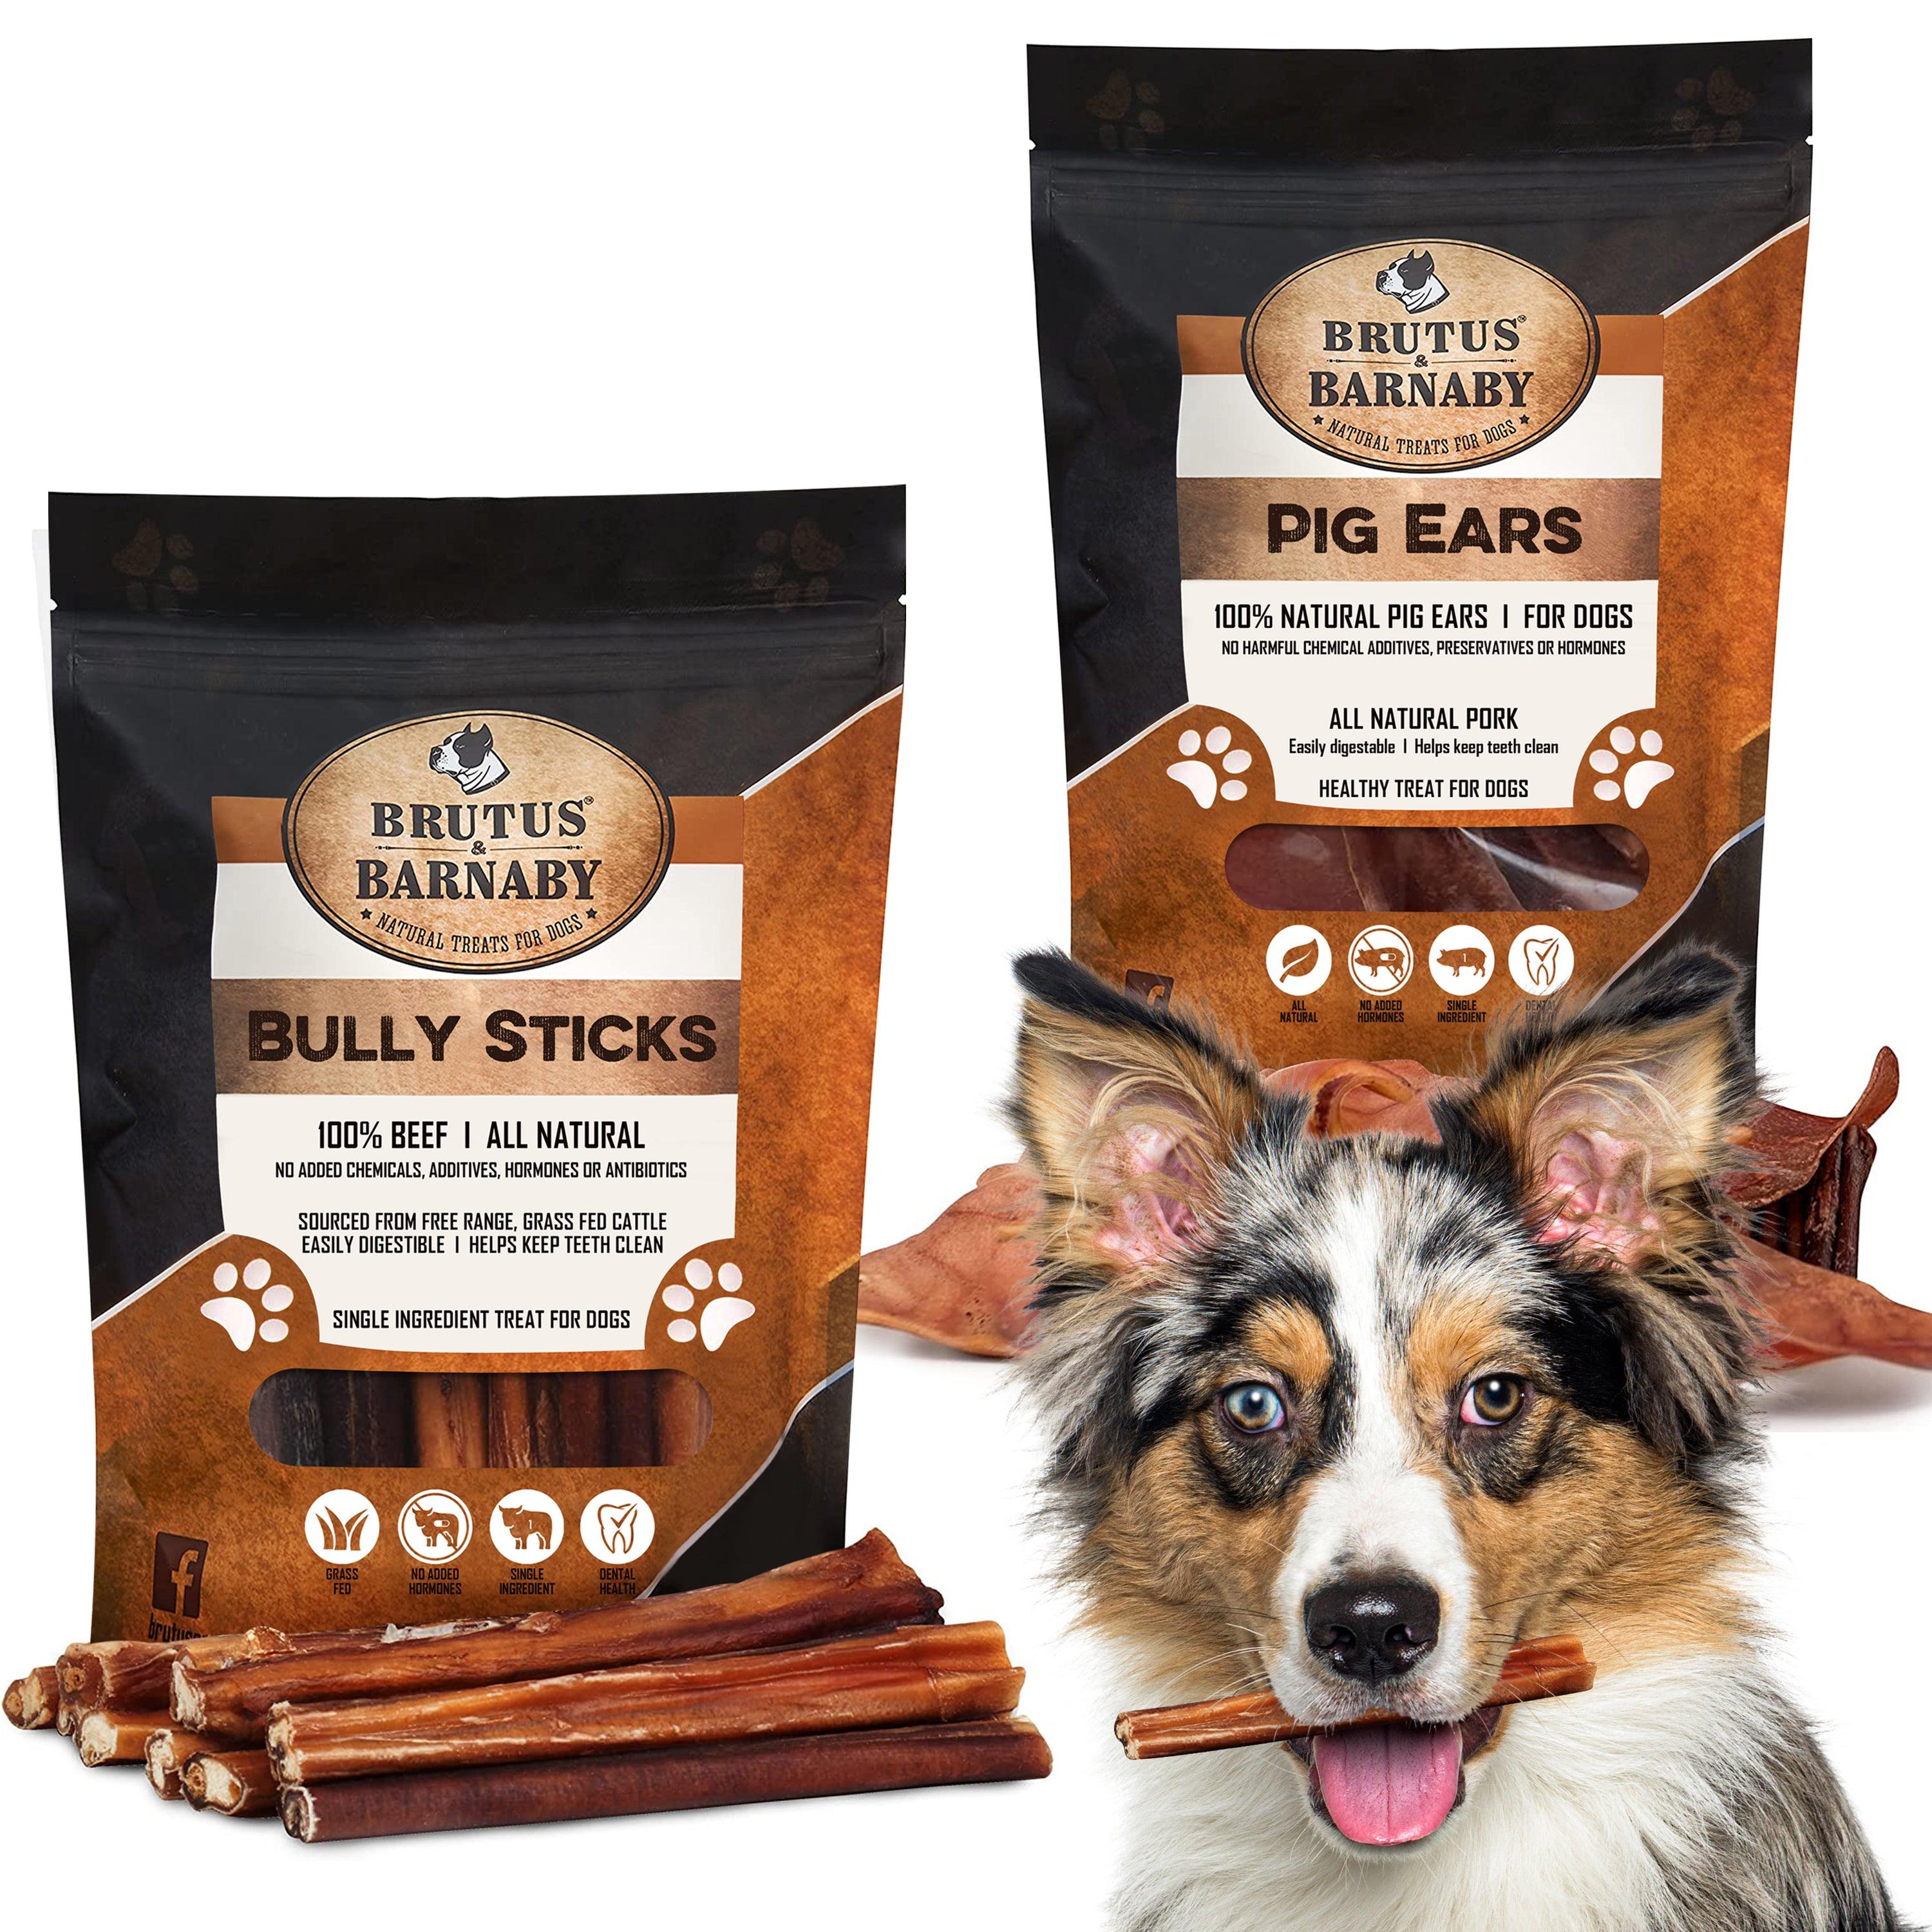 Natural Whole Pig Ear Dog Treat + Bully Sticks for Dogs - 6-Inch Low Odor, Premium Pizzle Without Added Hormones - Brutus & Barnaby